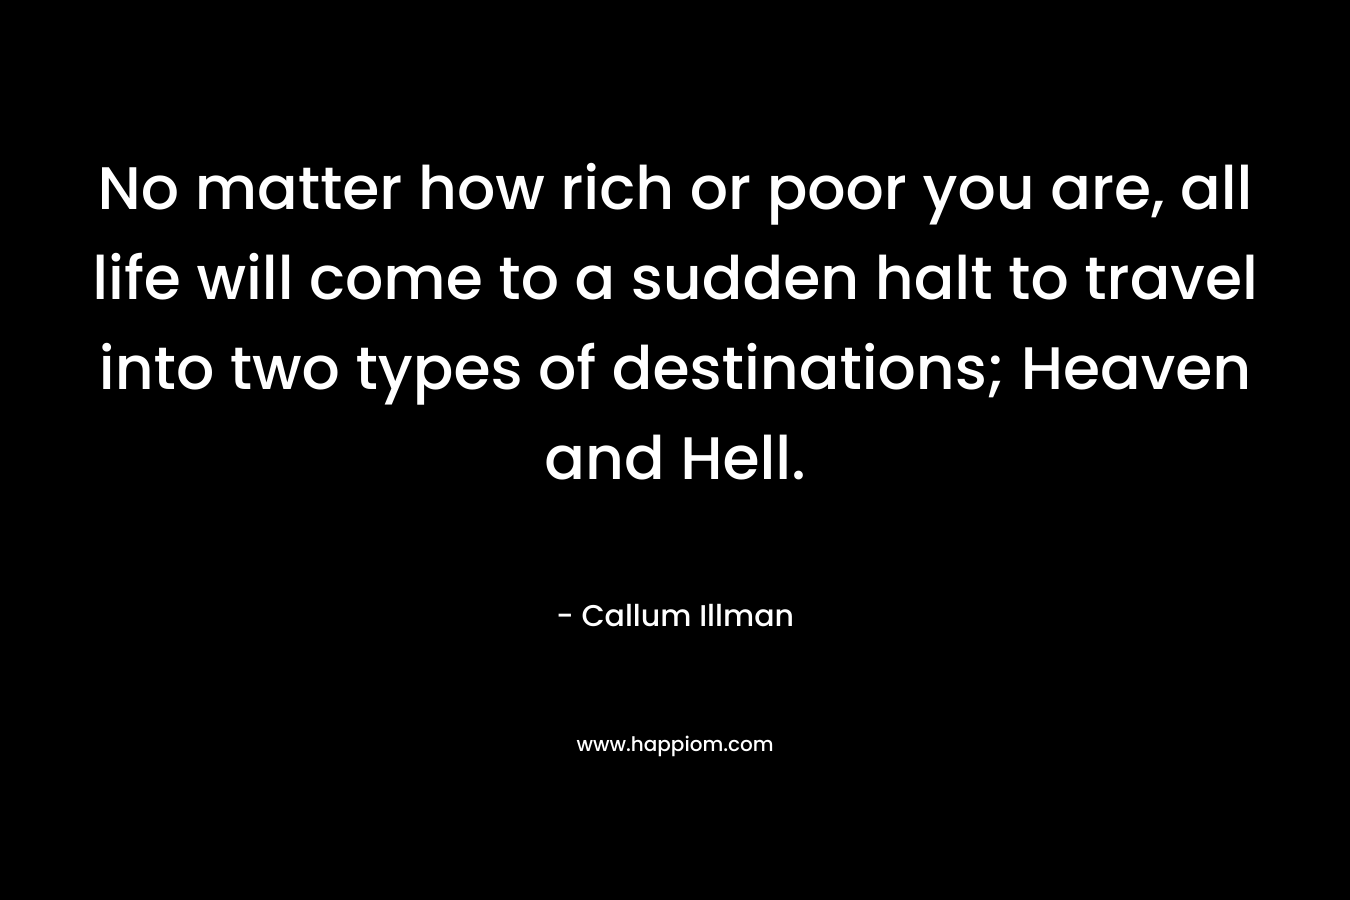 No matter how rich or poor you are, all life will come to a sudden halt to travel into two types of destinations; Heaven and Hell. – Callum Illman